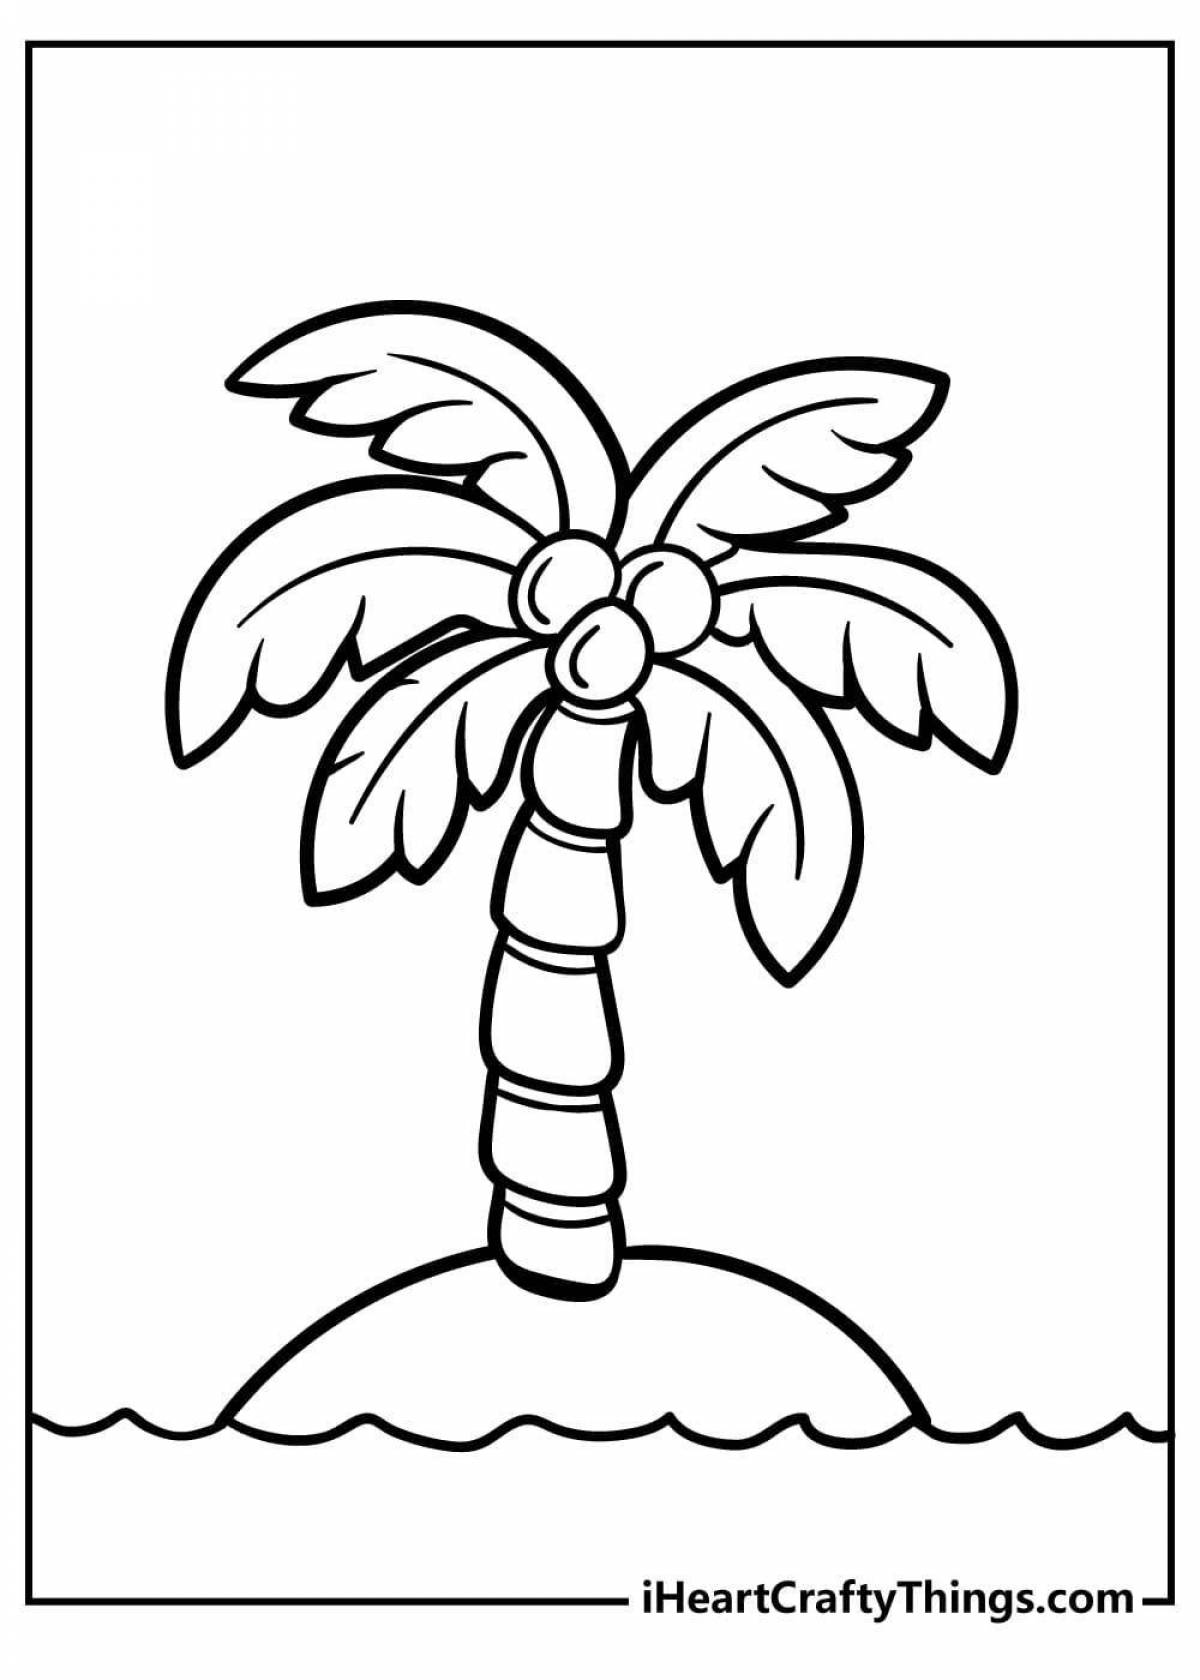 Unique palm tree coloring page for kids